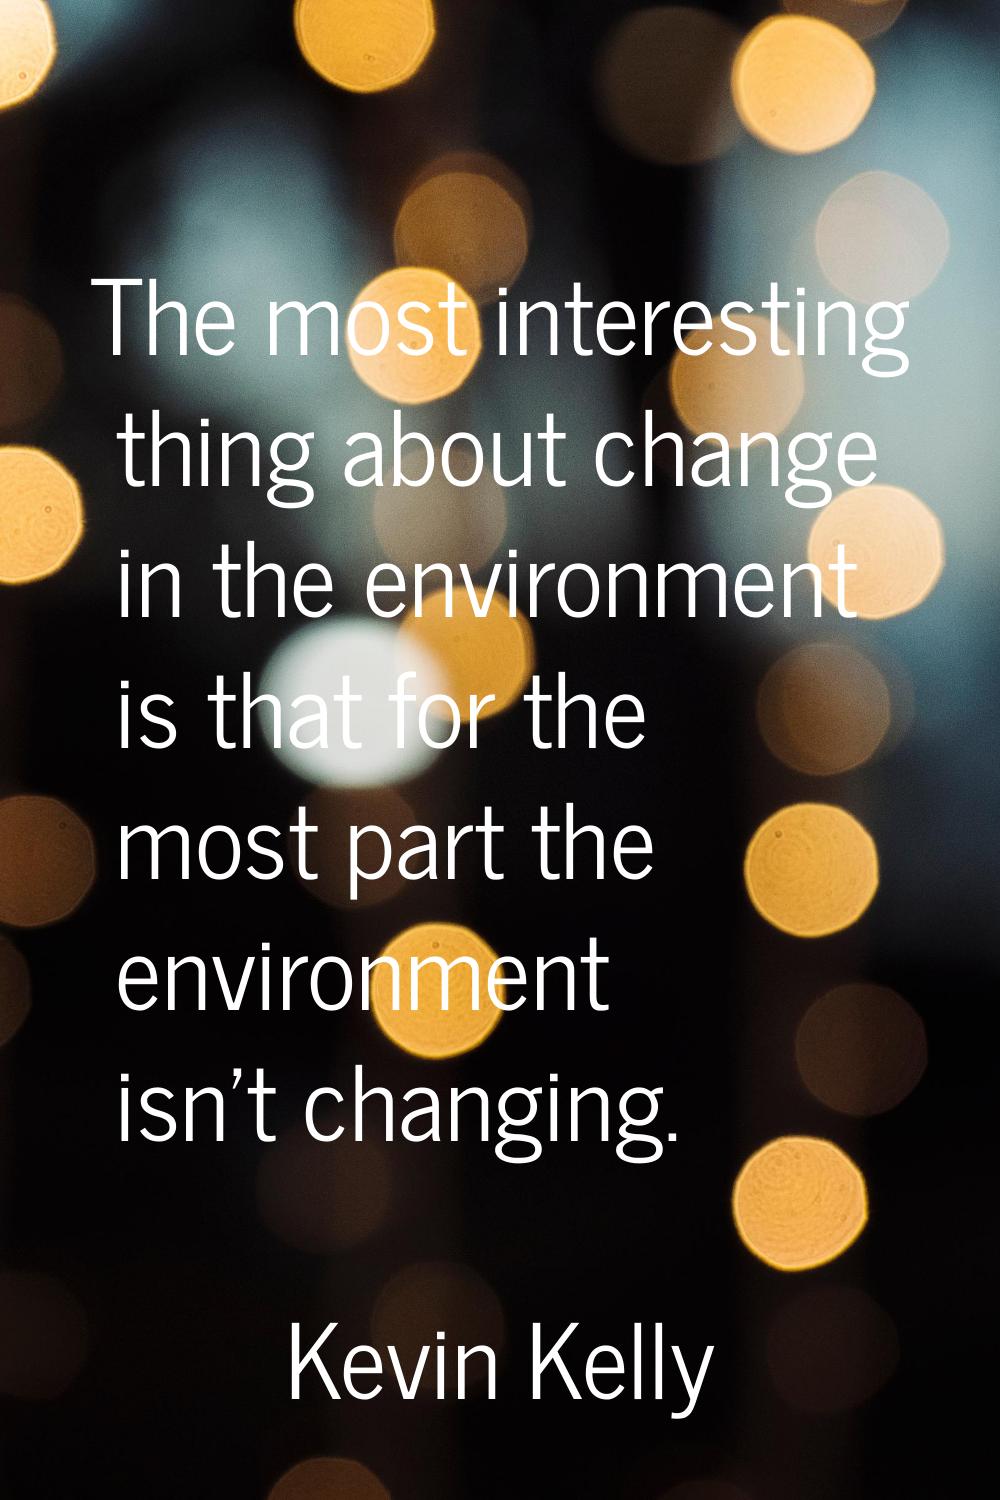 The most interesting thing about change in the environment is that for the most part the environmen